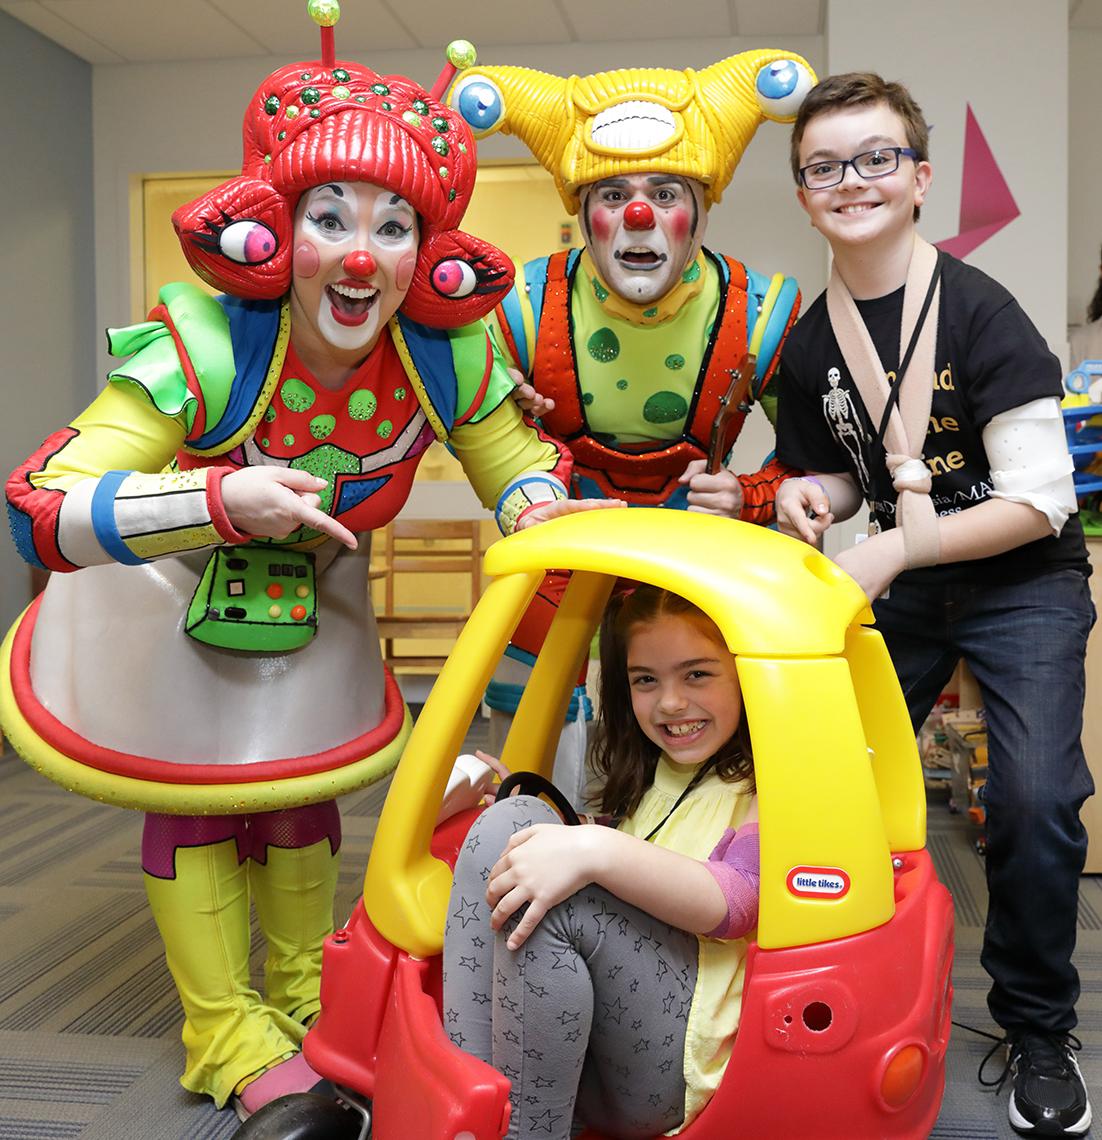 In toy car, driver Ellasyn Berry is joined by circus clowns and Rylan Michael Pederson.